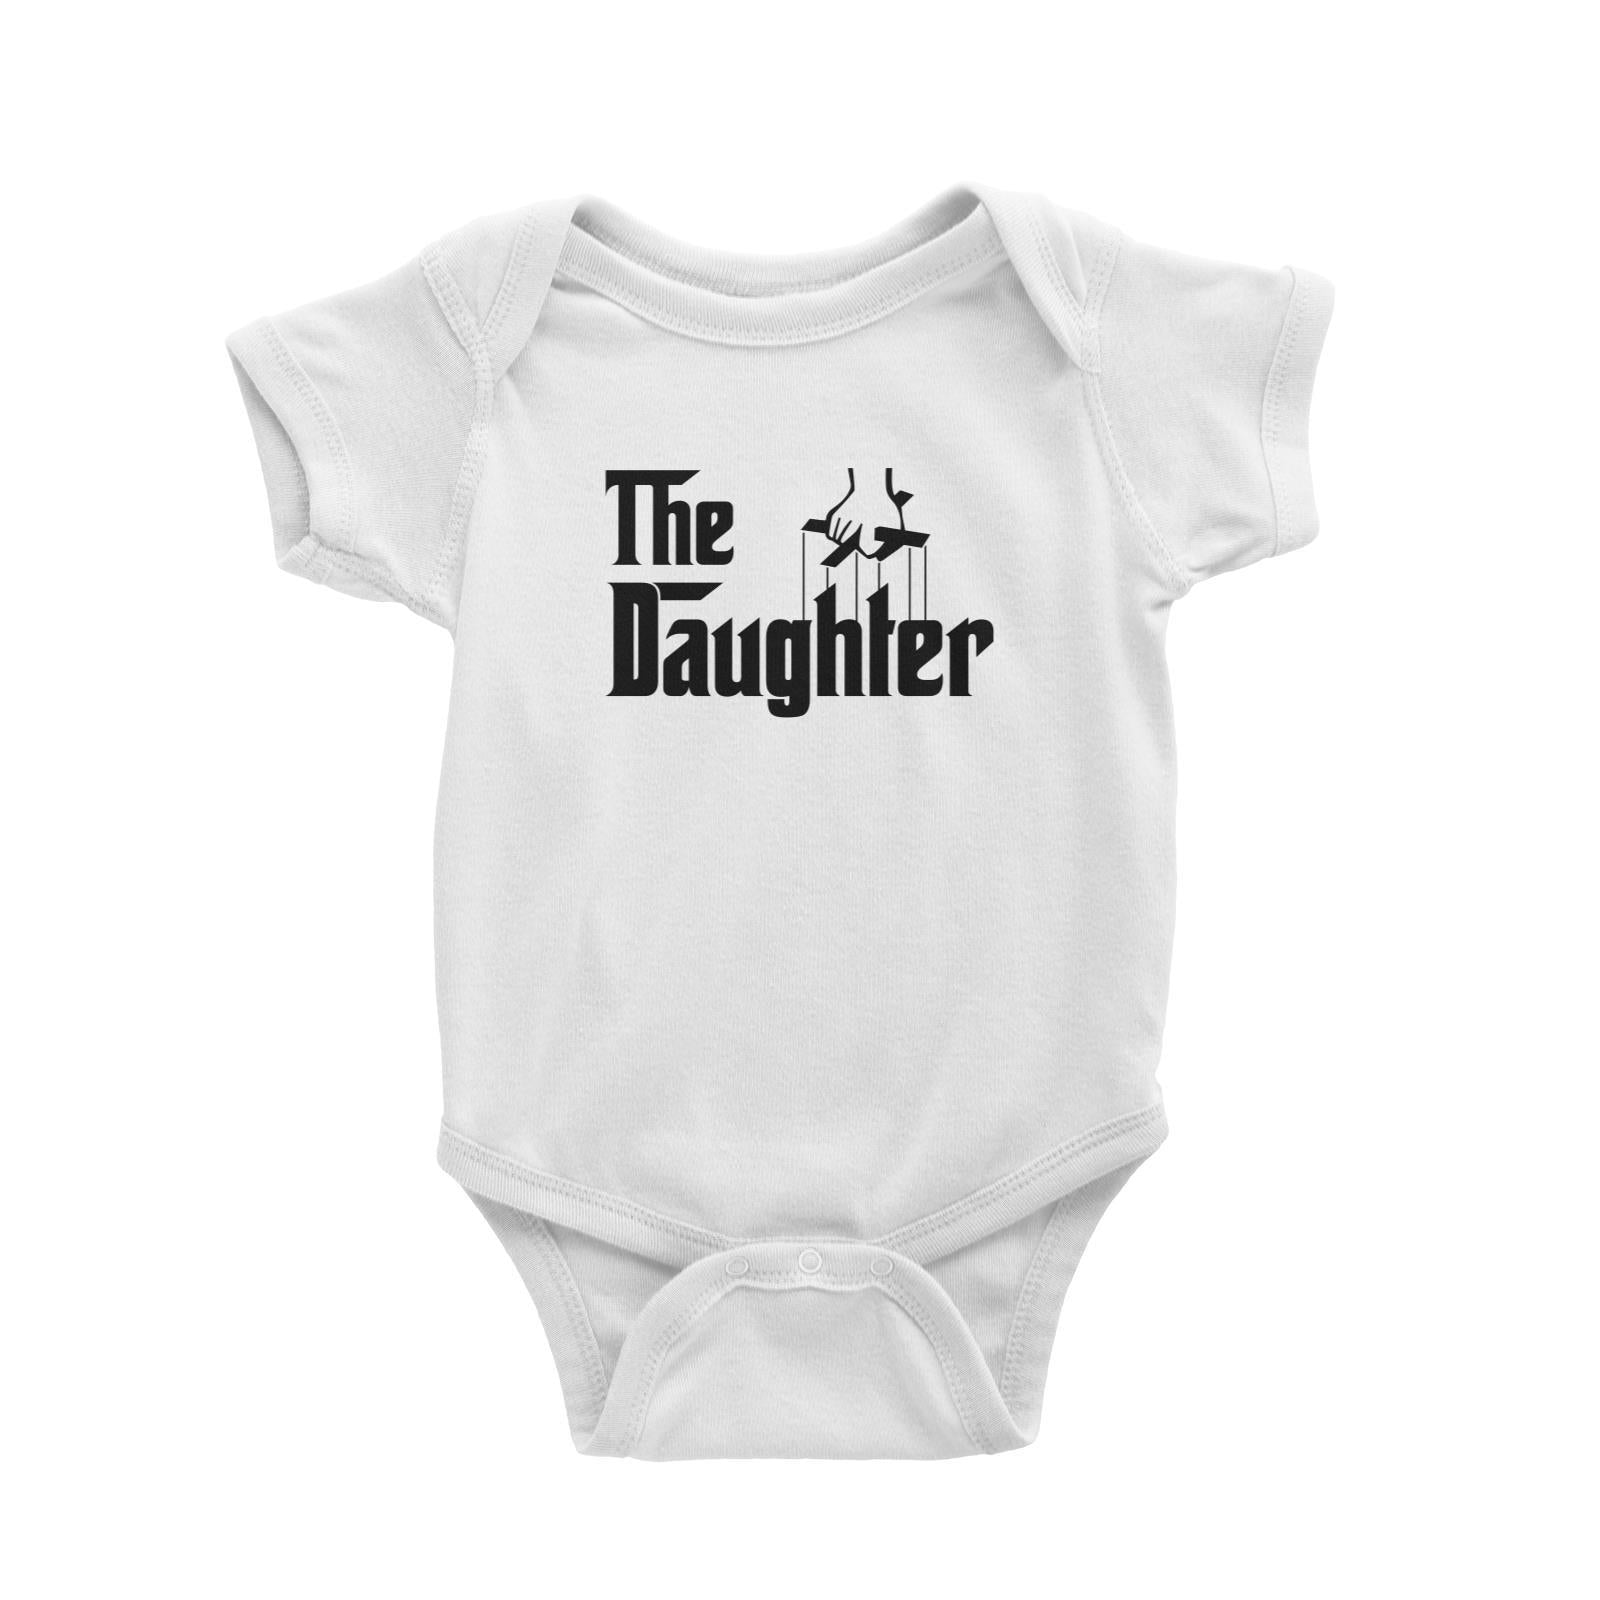 The Daughter Baby Romper Godfather Matching Family